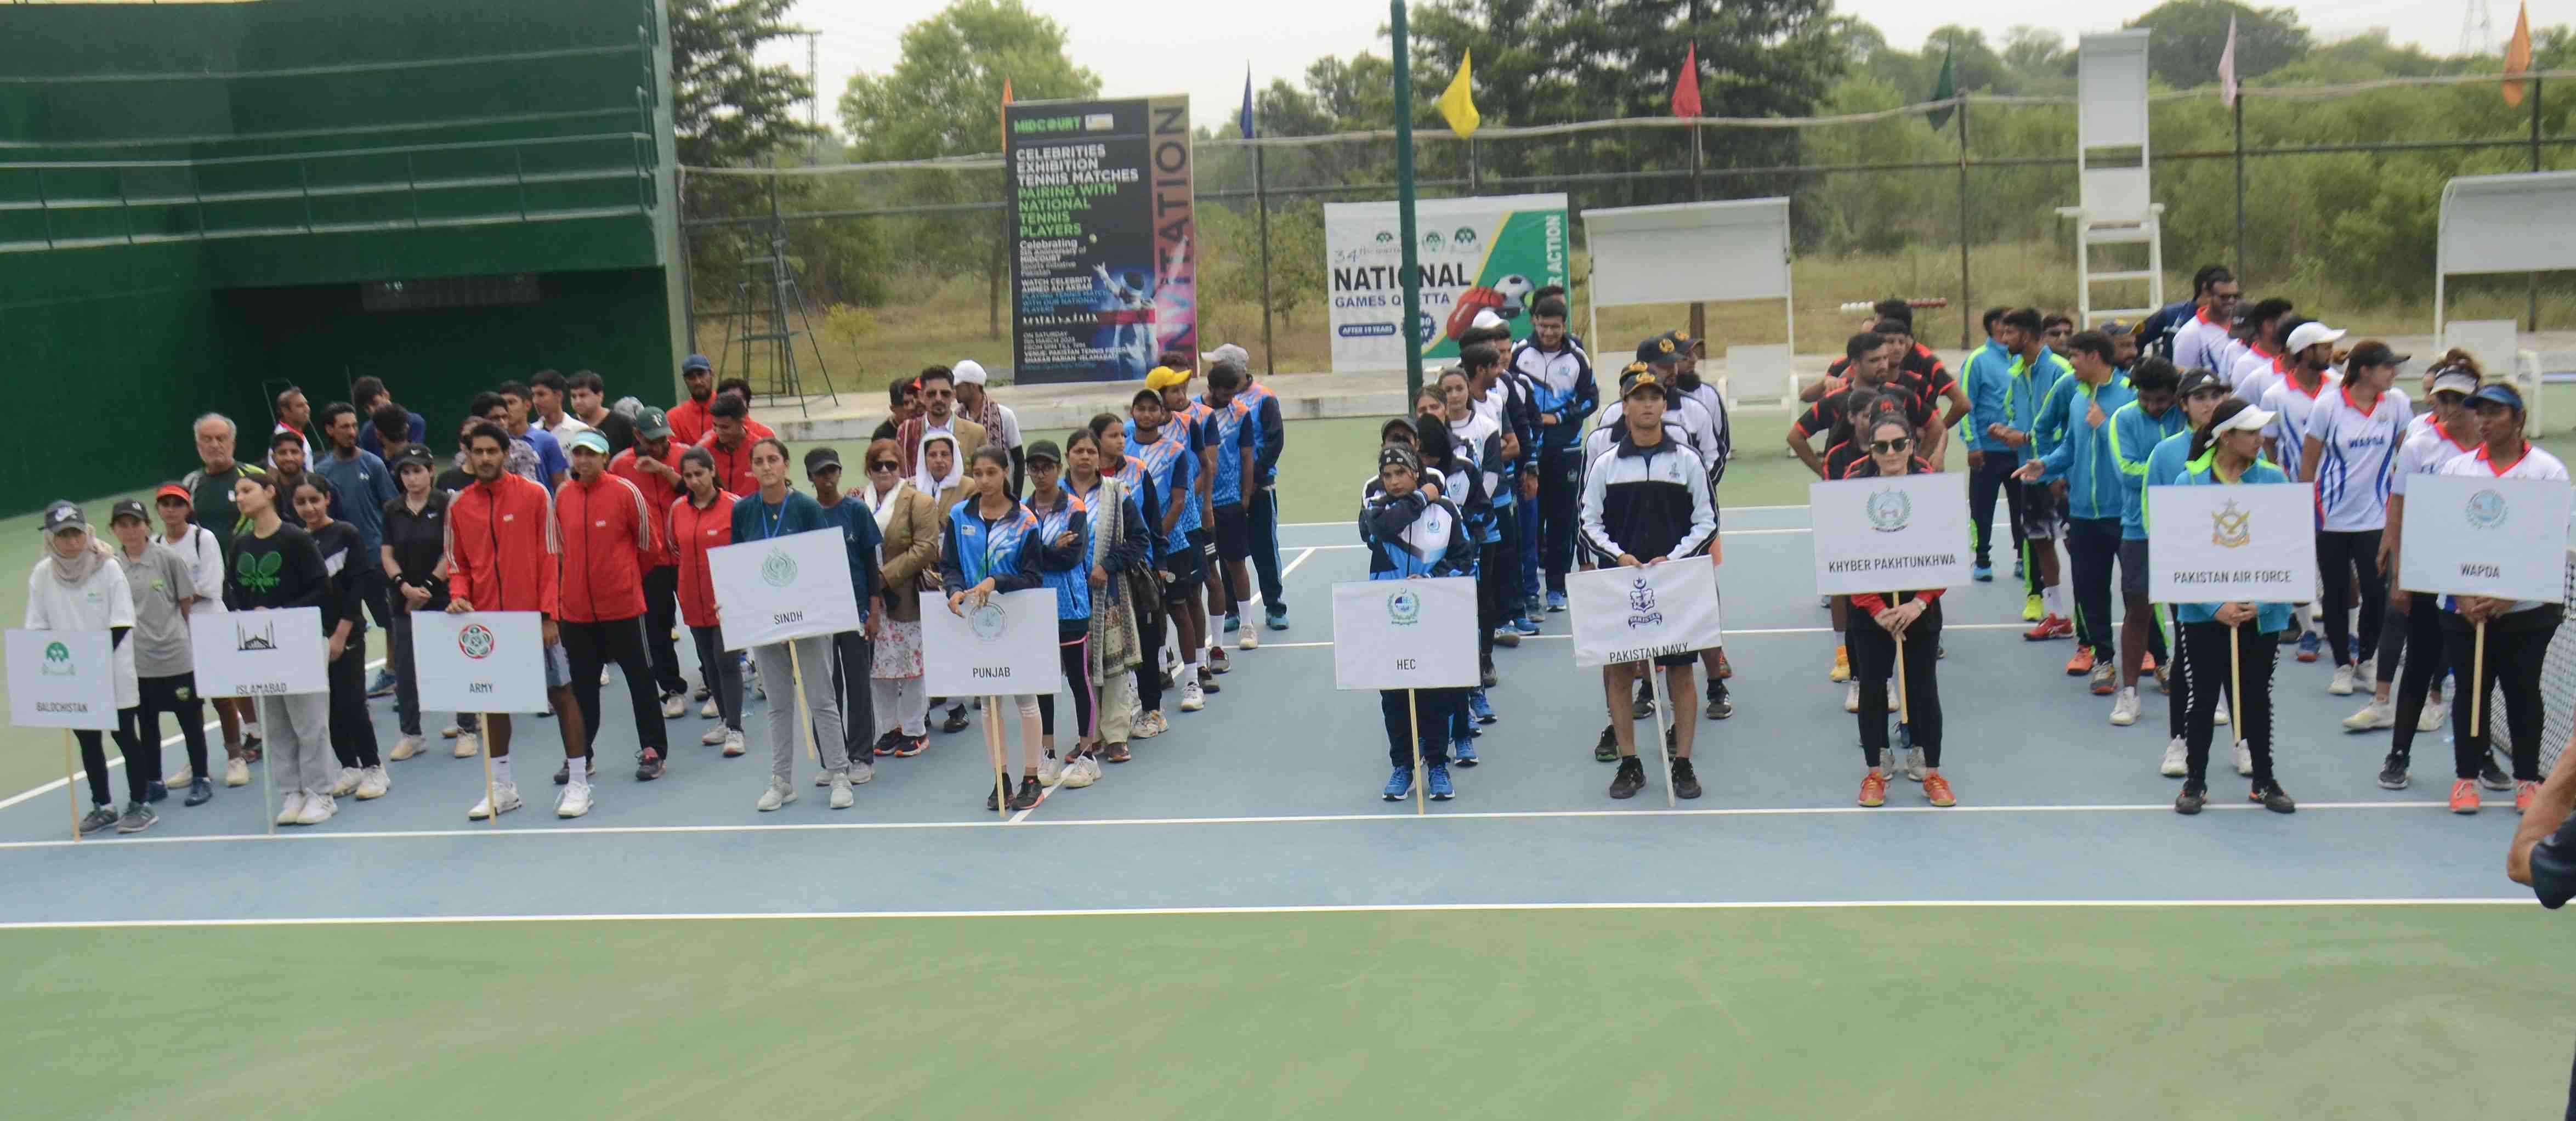 Tennis News: WAPDA, PAF, KPK, and Army qualify for semifinals